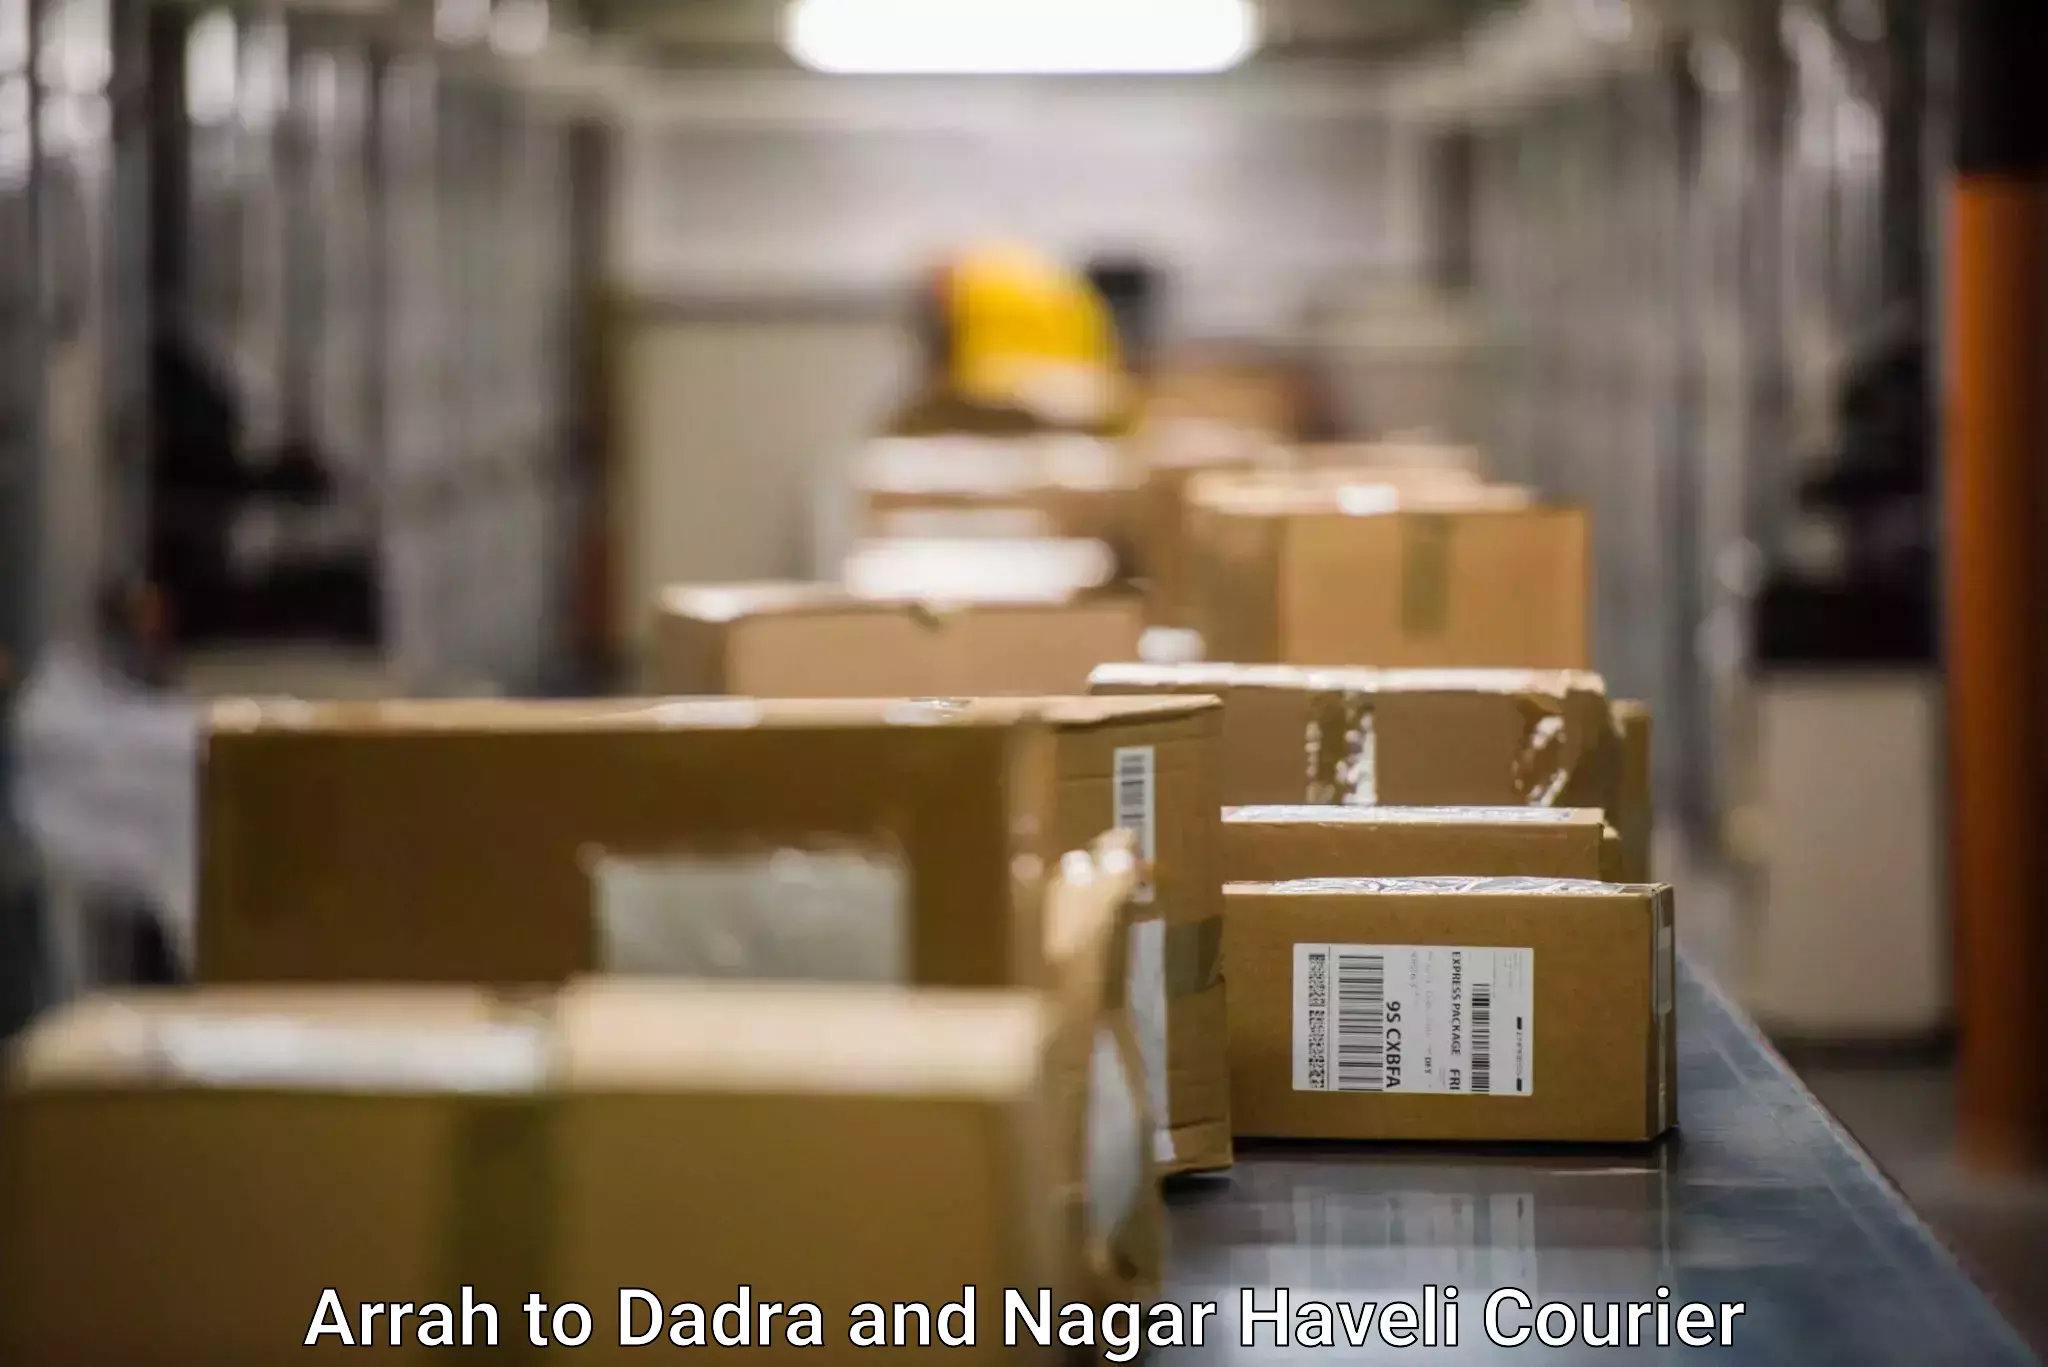 State-of-the-art courier technology Arrah to Dadra and Nagar Haveli